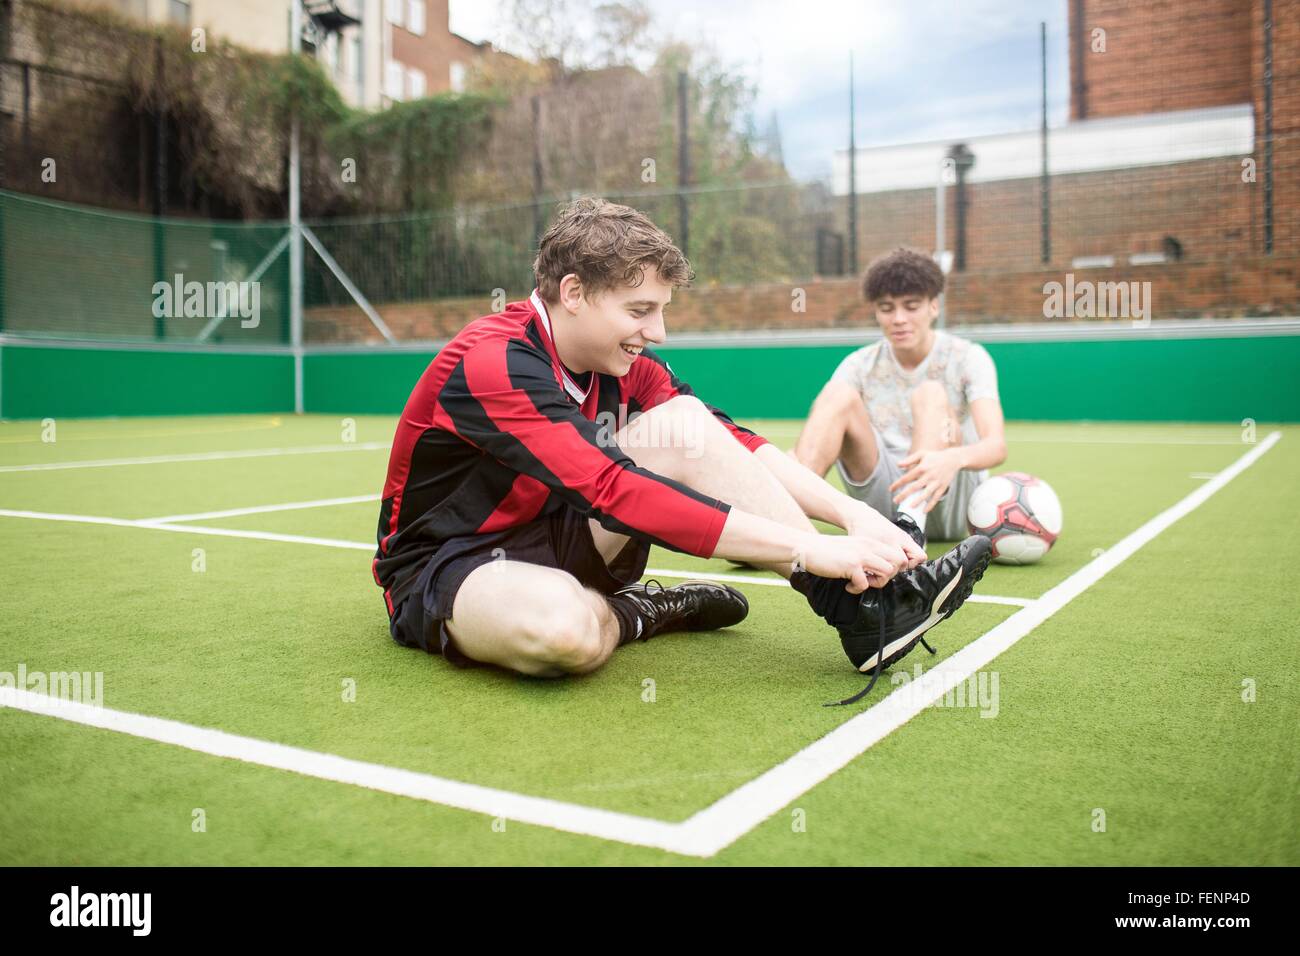 Two young men on urban football pitch, tying shoelaces Stock Photo